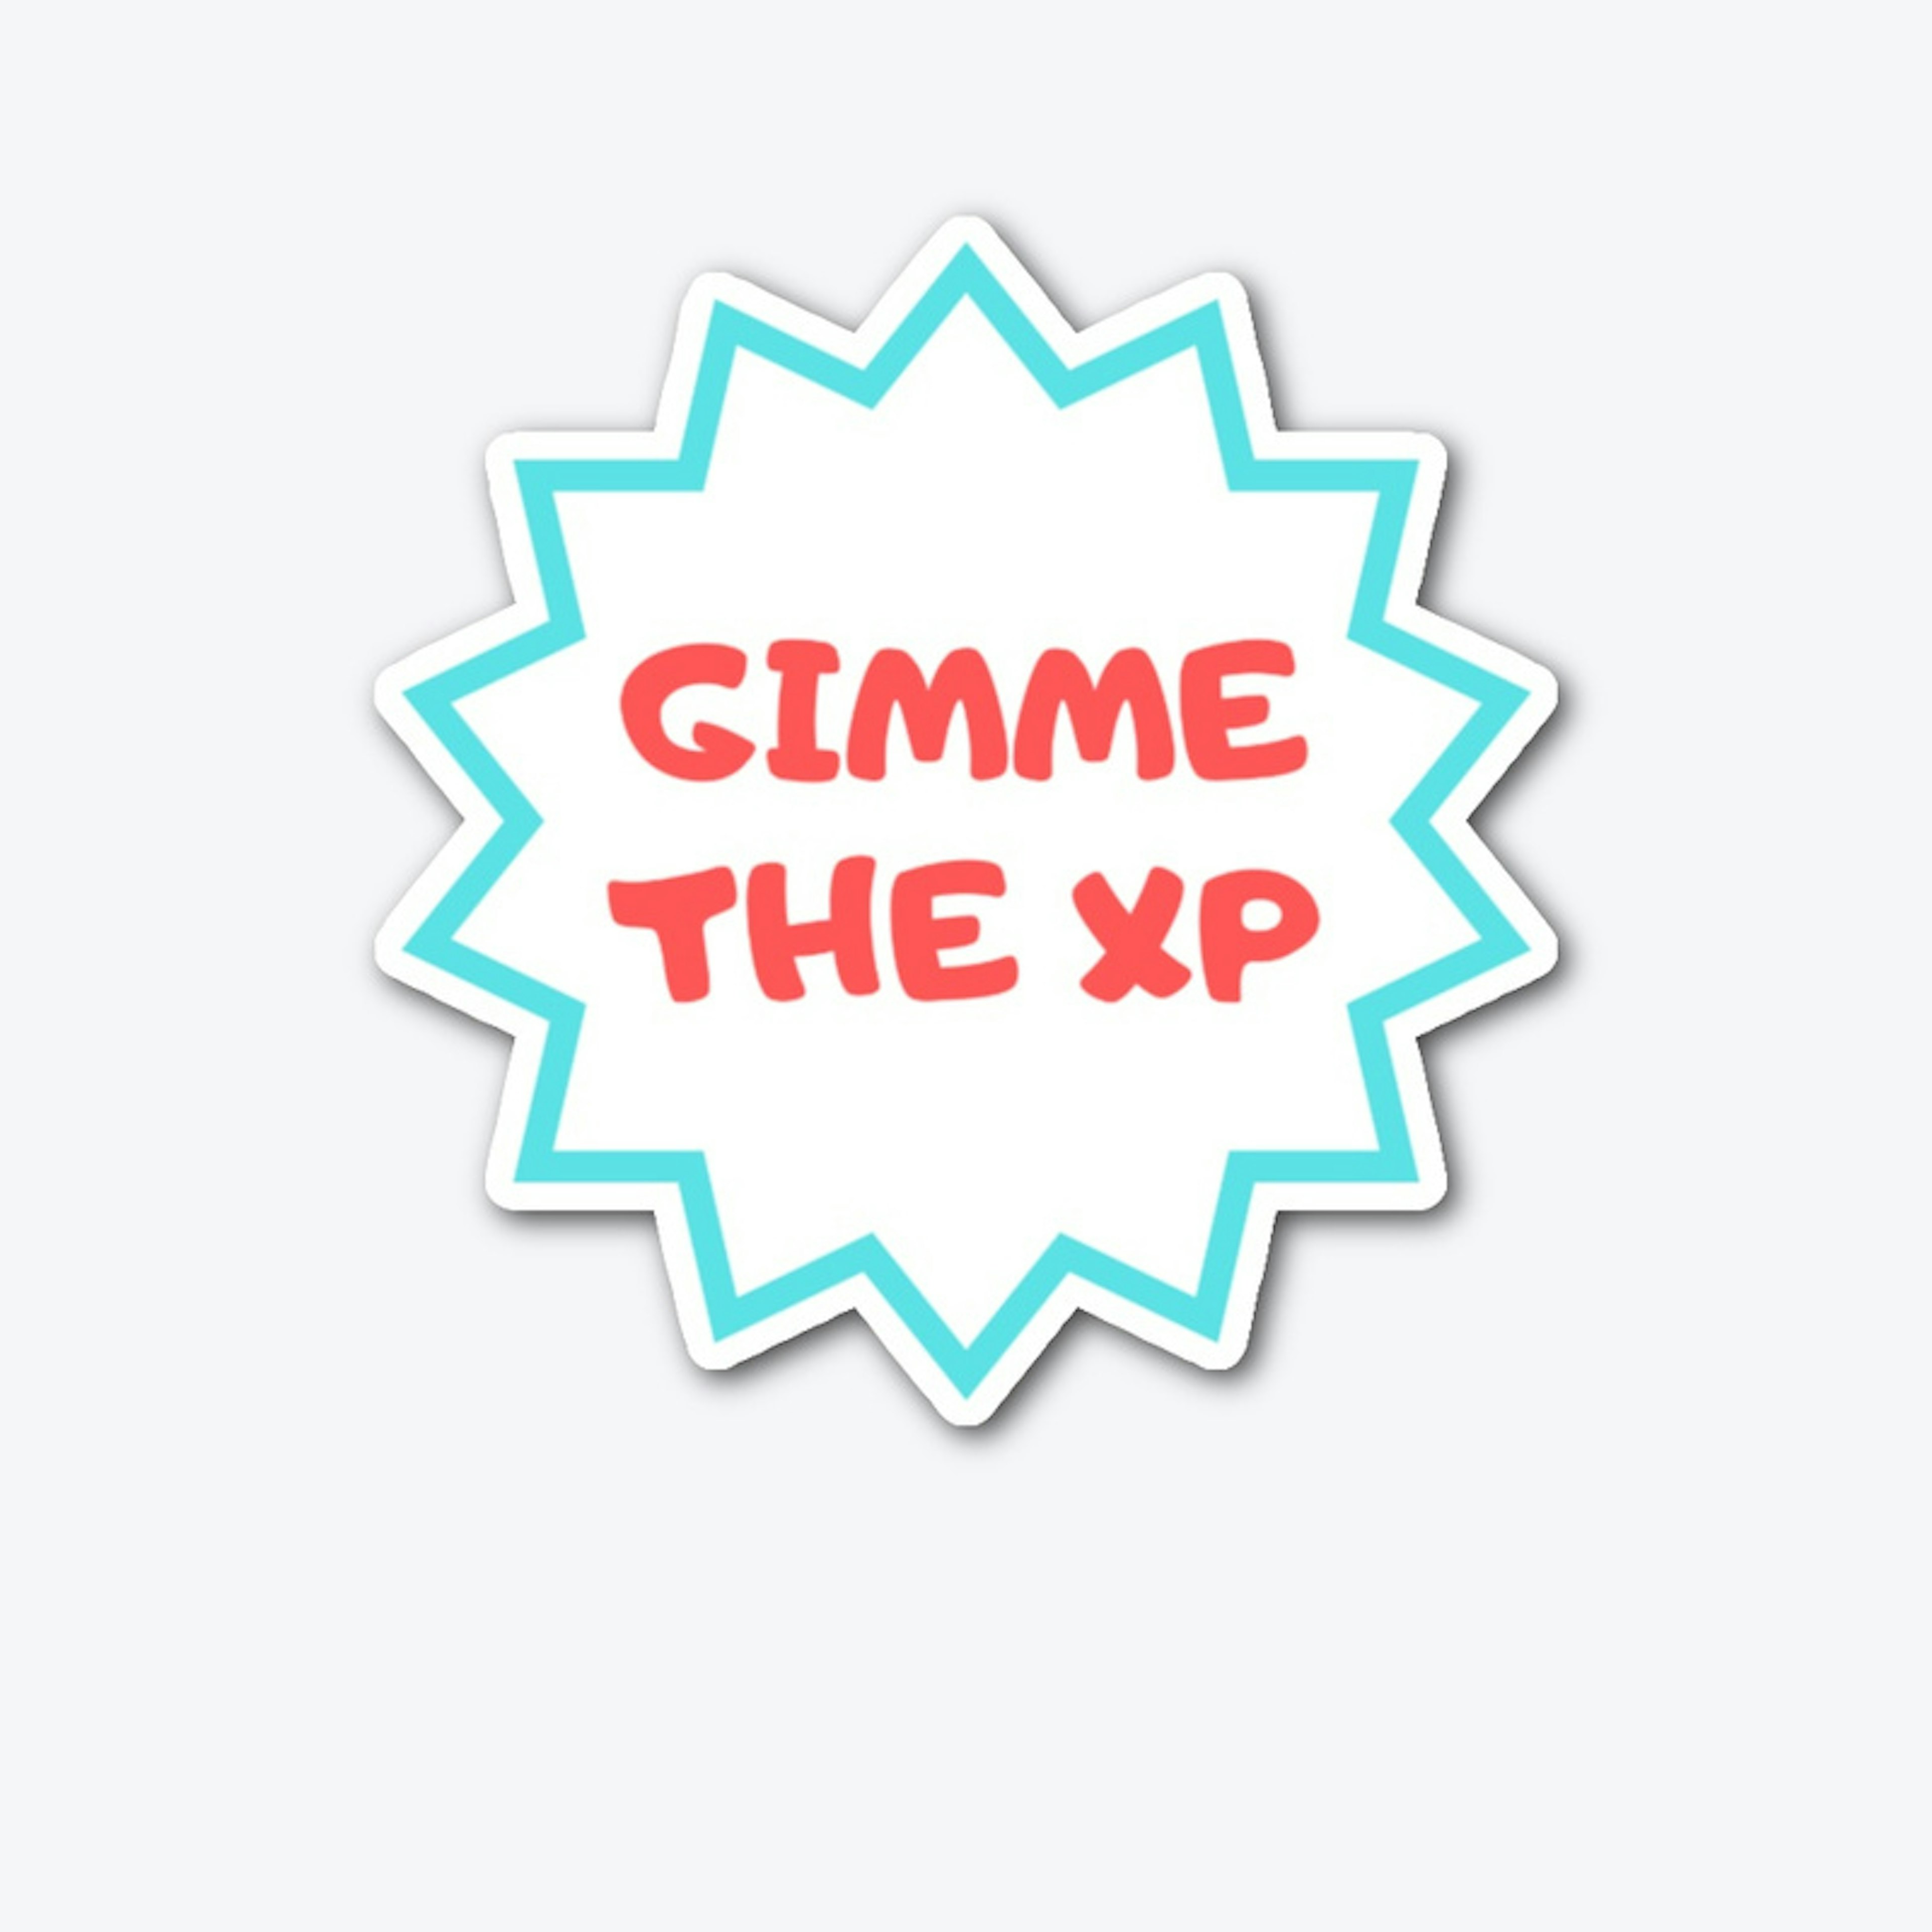 Gimme the XP